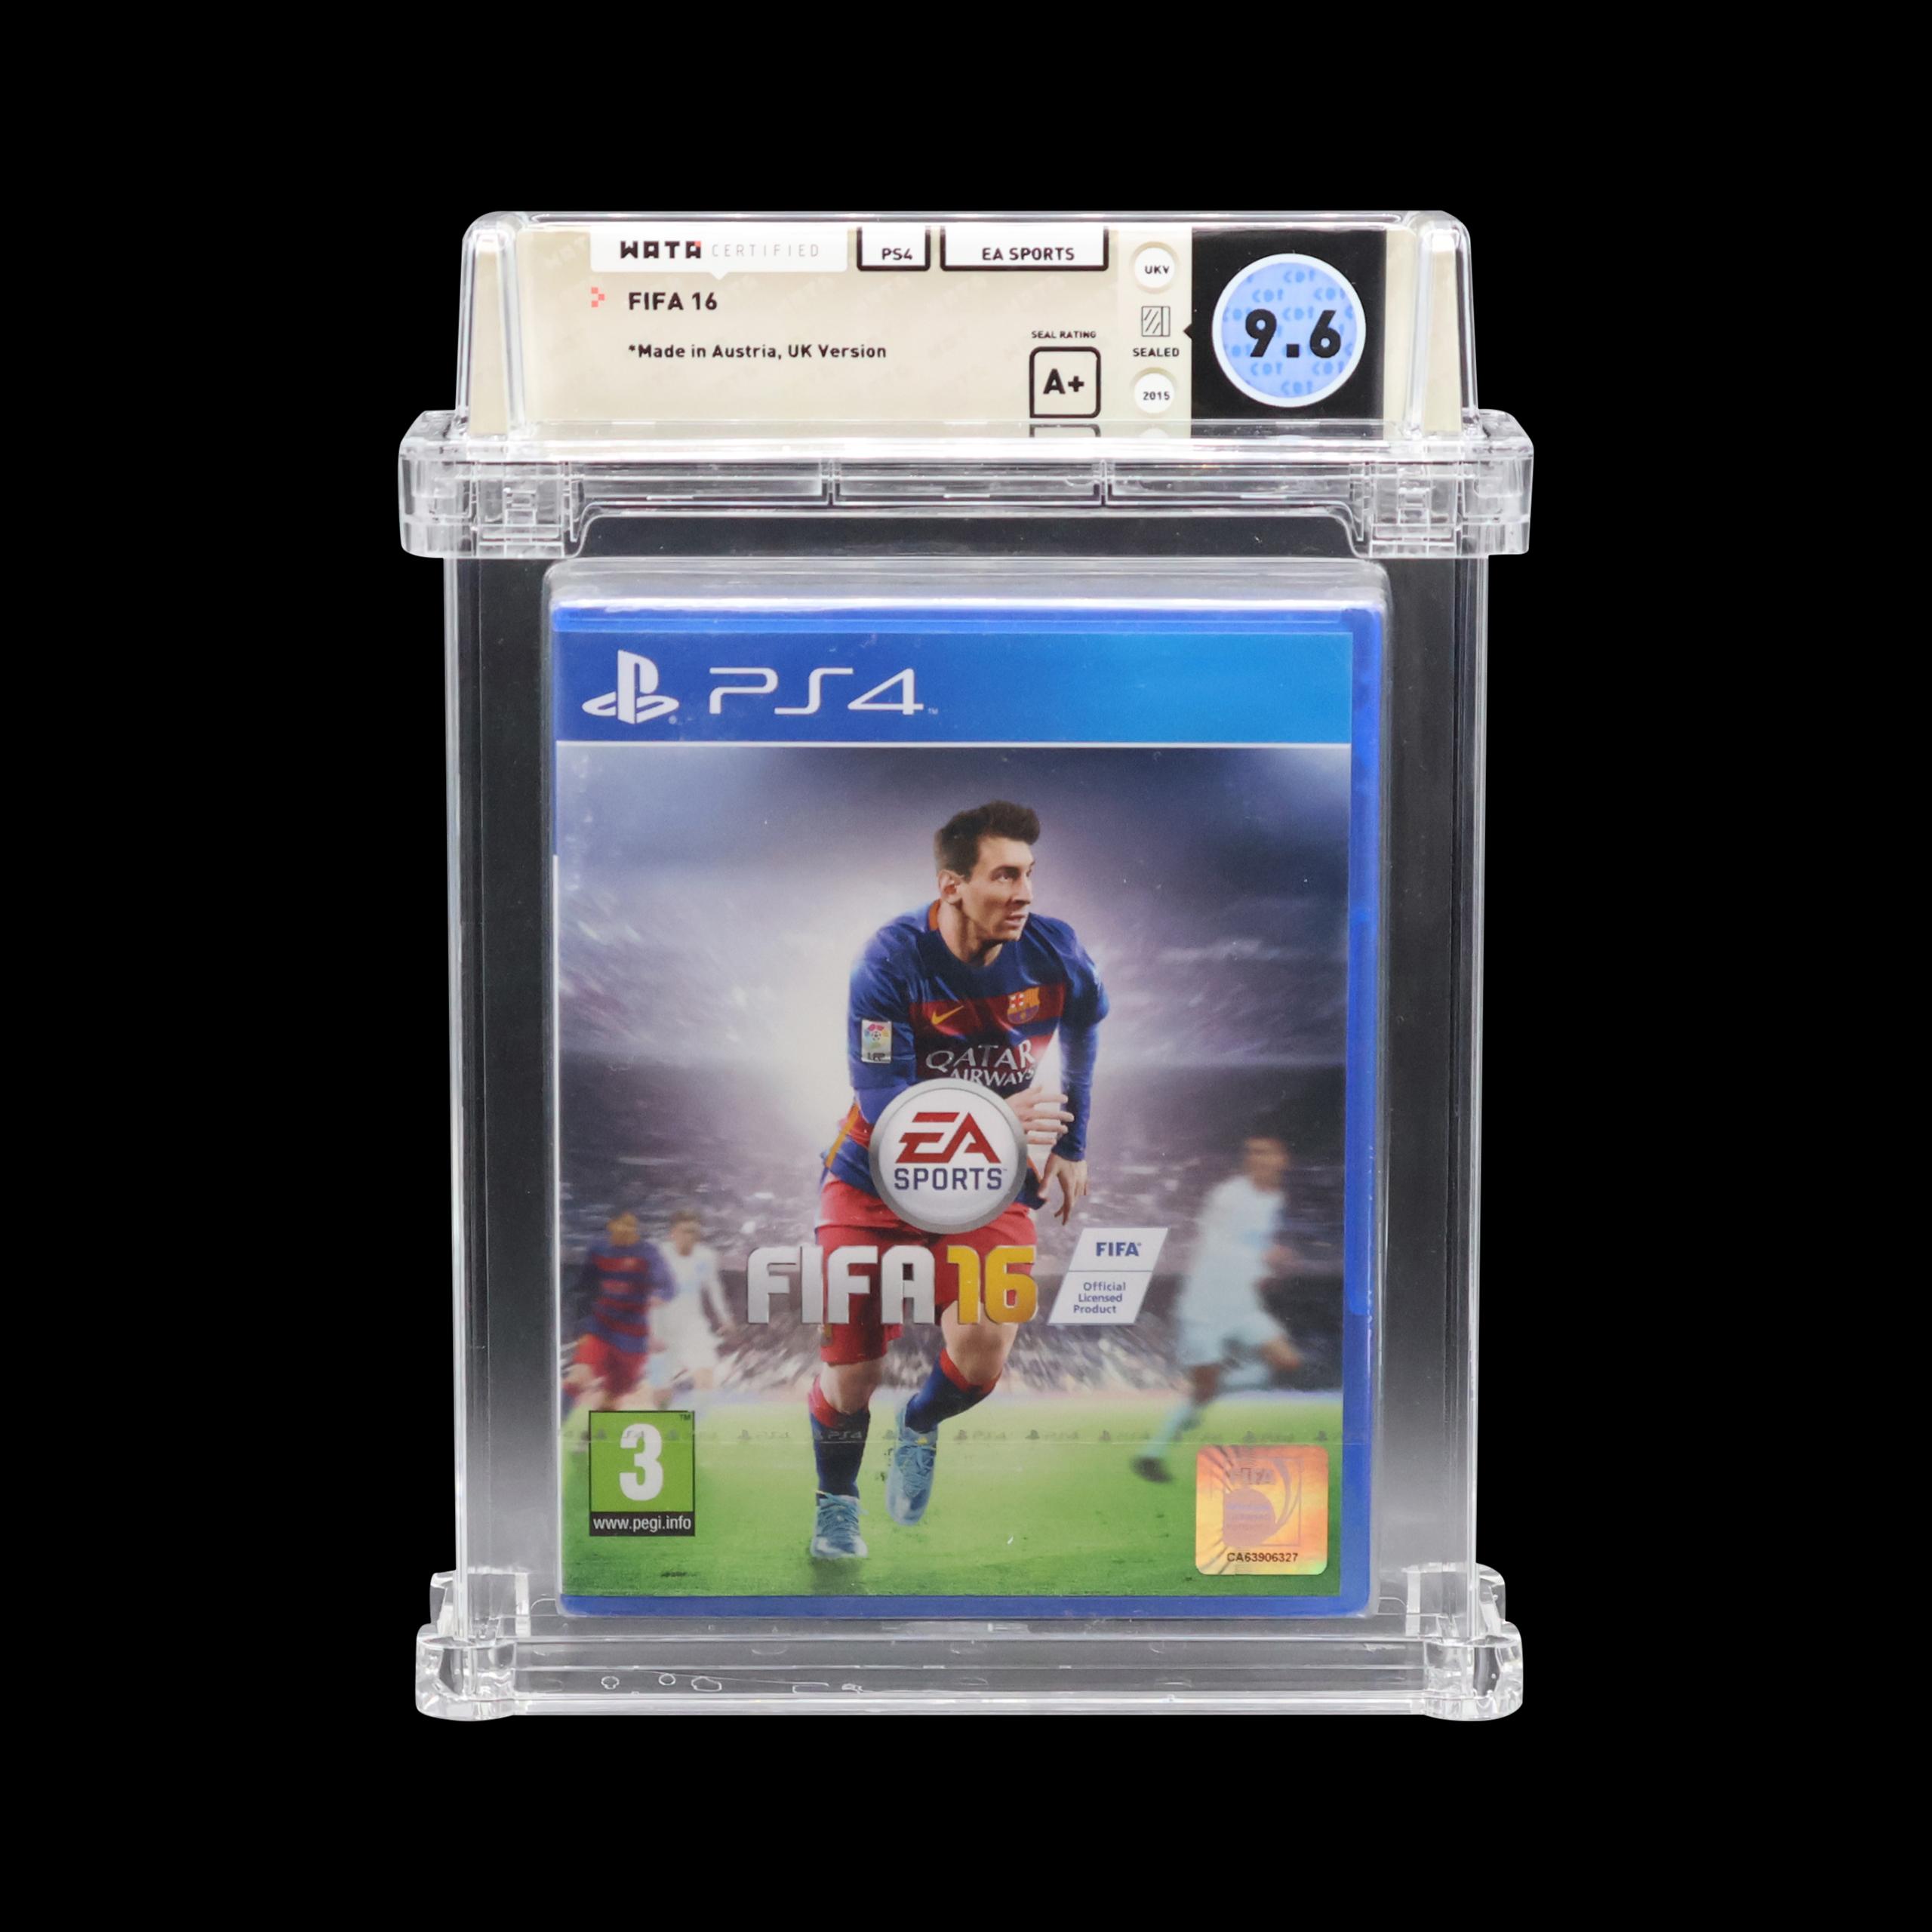 WATA-graded FIFA 16 PS4 game in near-mint condition, featuring prominent soccer player on cover.